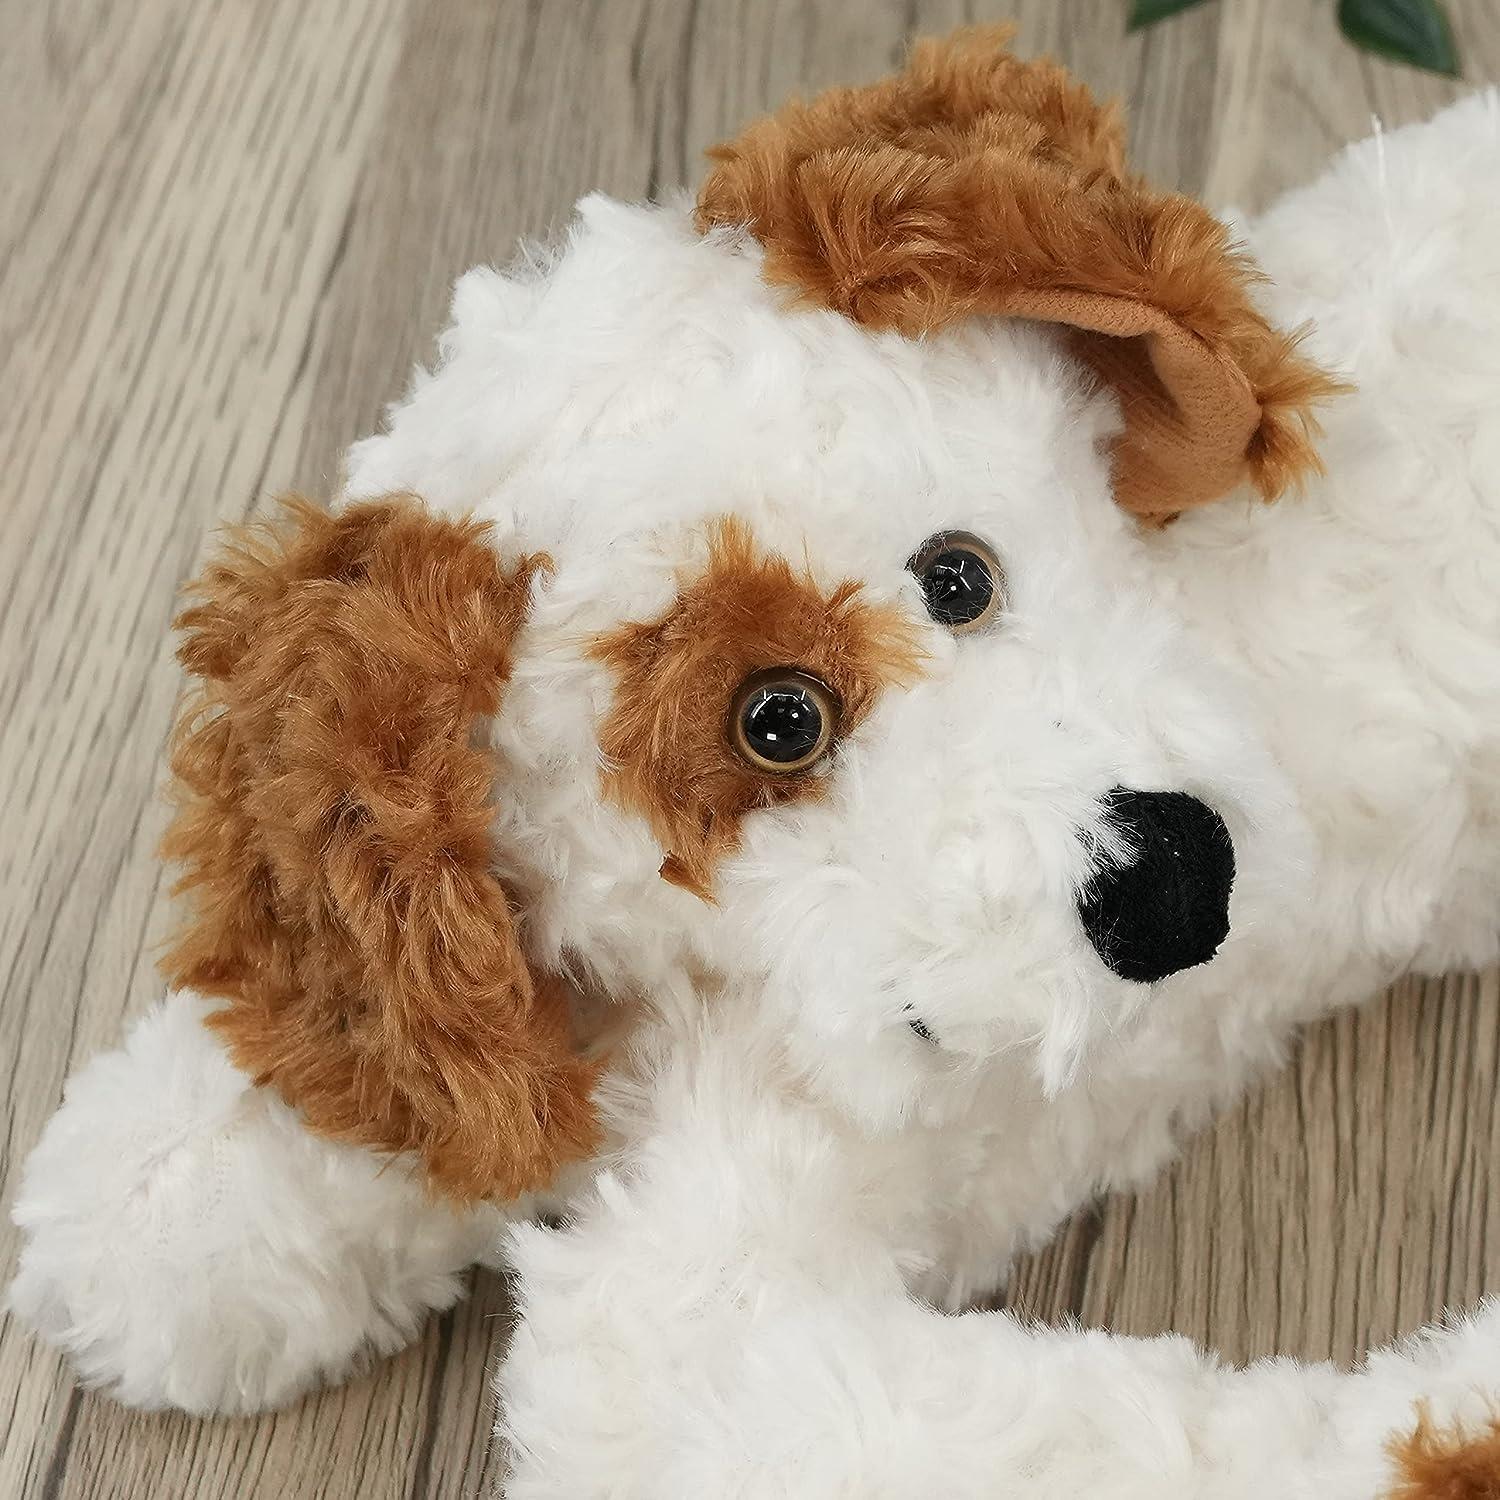 Novelty Cream Dog Excluder by Geezy - The Magic Toy Shop